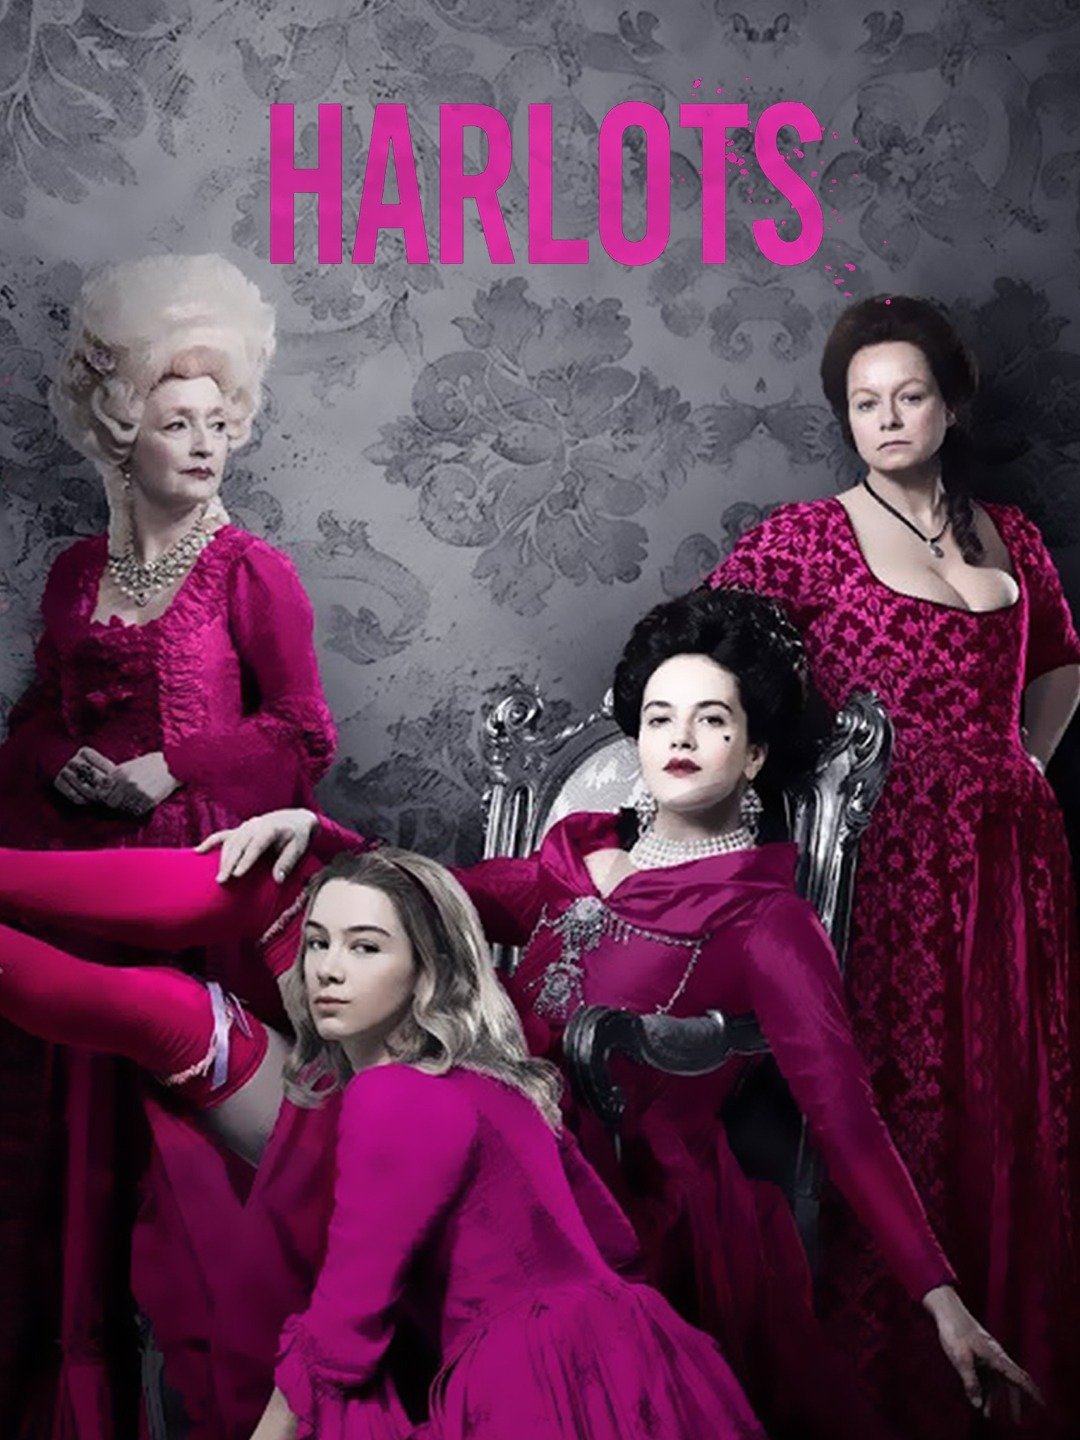 two harlots is more good than 1